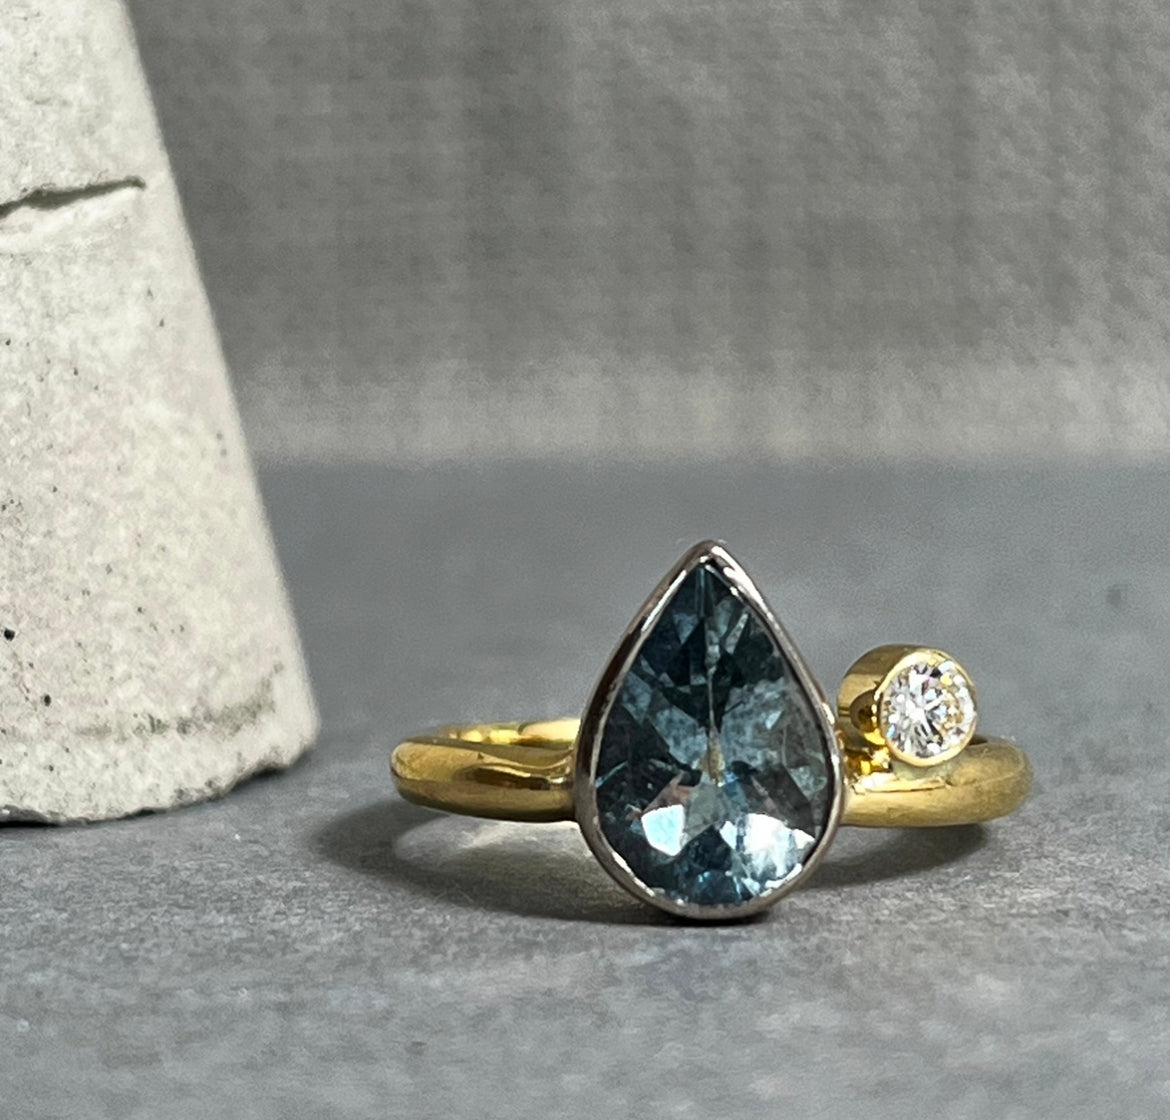 Gold ring with a tear drop shaped gem stone in blue and a small round diamond